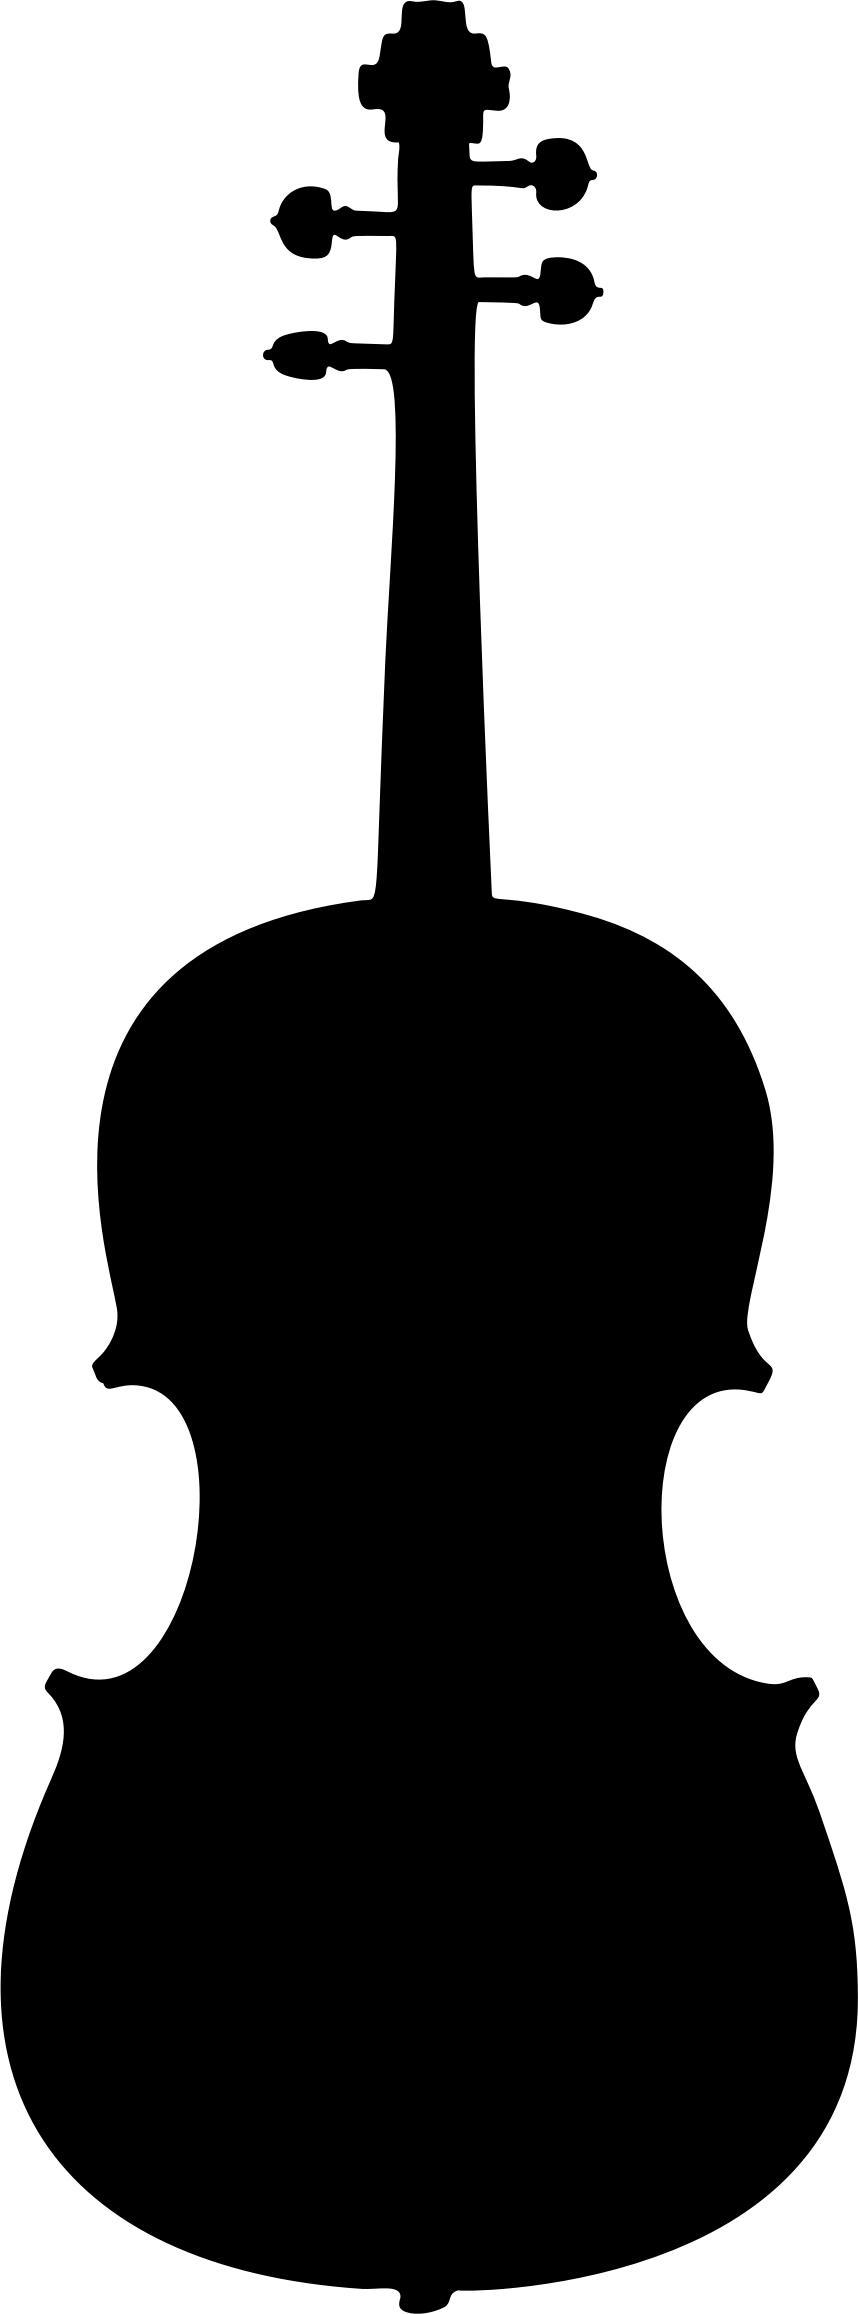 Detailed Violin Silhouette png transparent